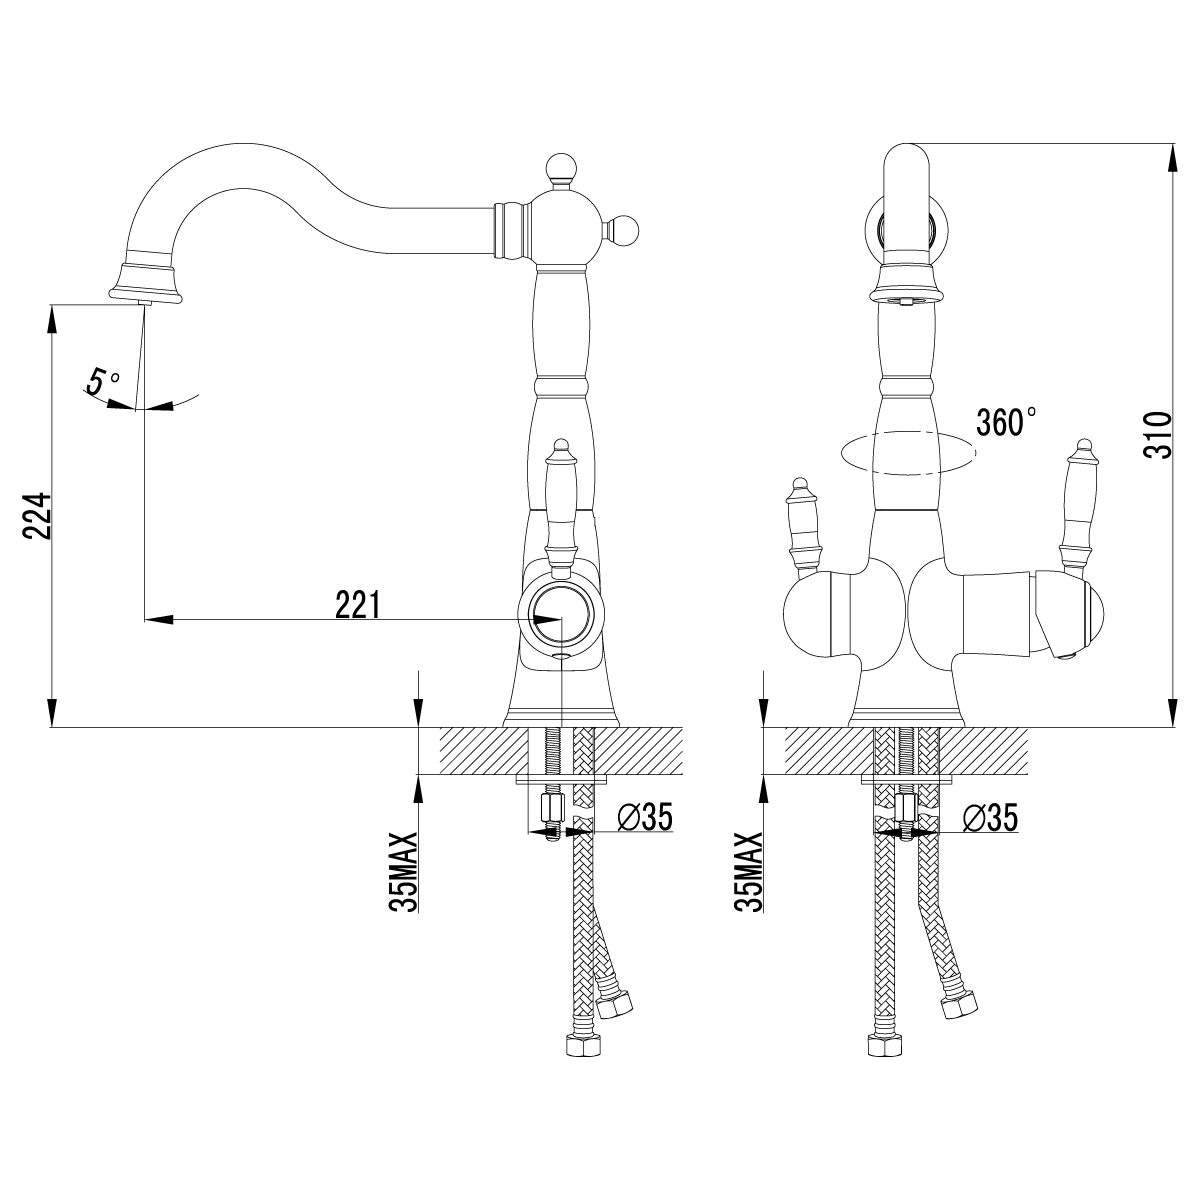 LM3065C Kitchen faucet
with connection to drinking 
water supply